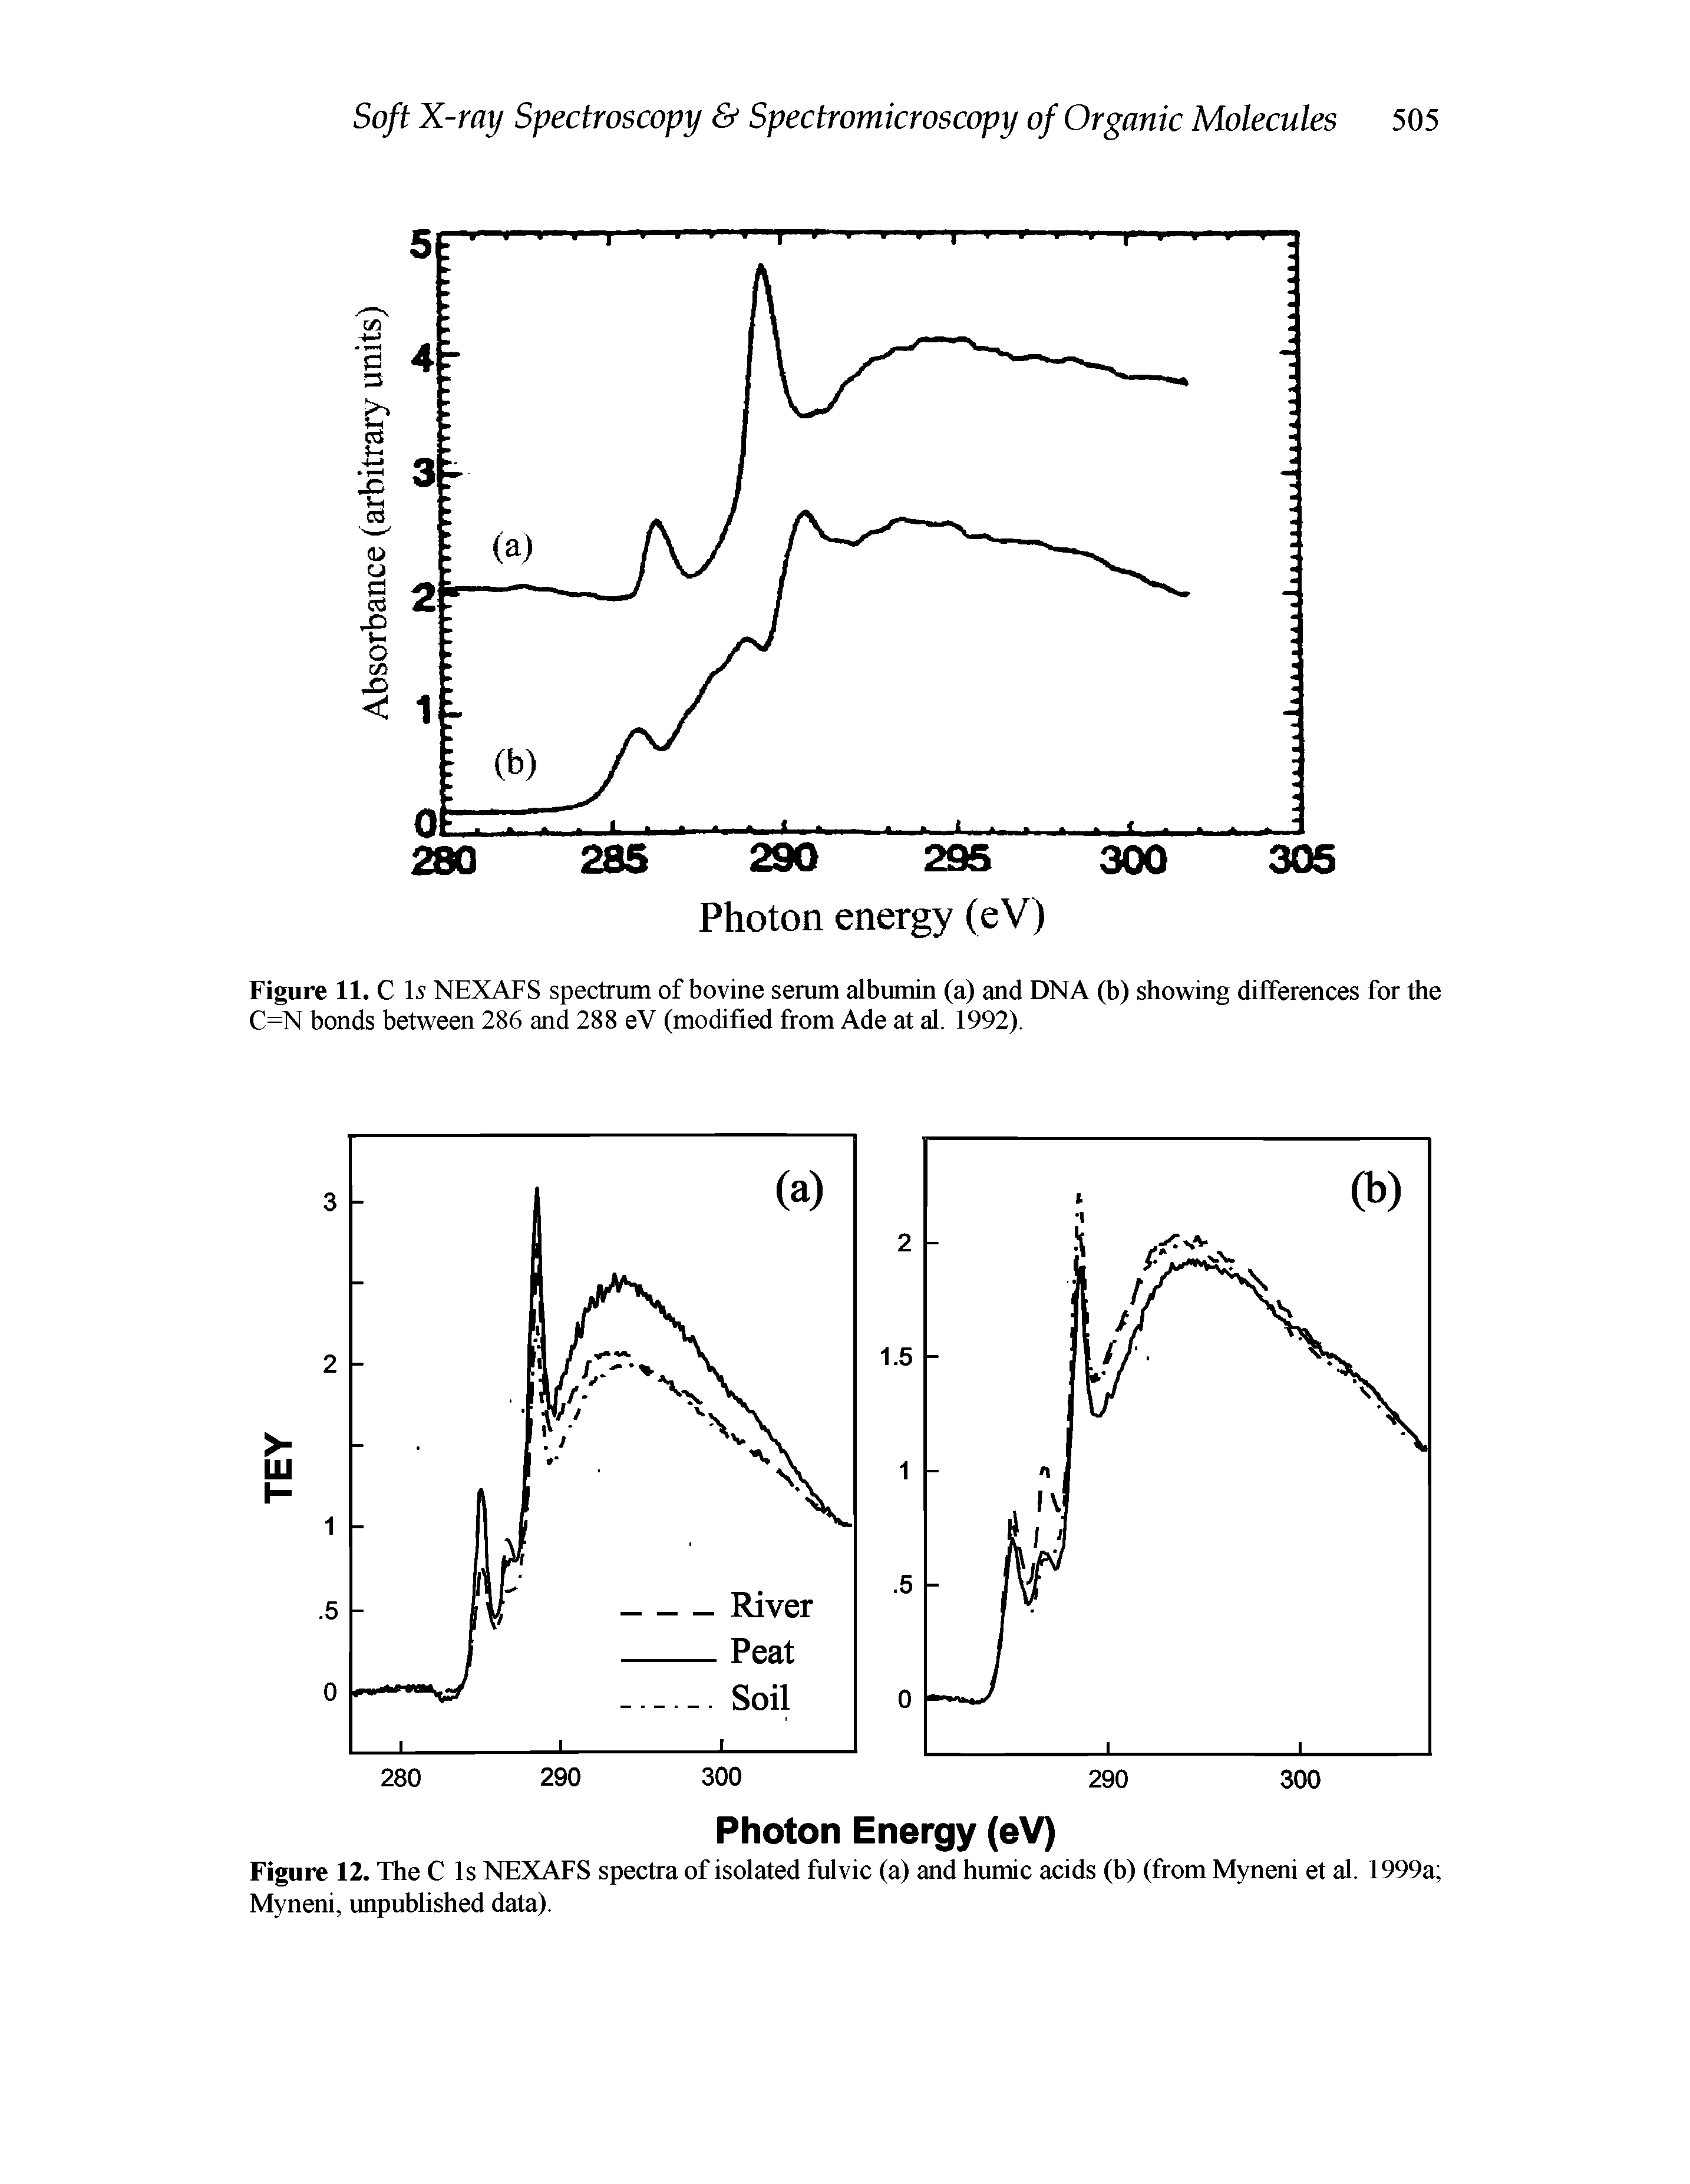 Figure 11. C Is NEXAFS spectrum of bovine serum albumin (a) and DNA (b) showing differences for the C=N bonds between 286 and 288 eV (modified from Ade at al. 1992).